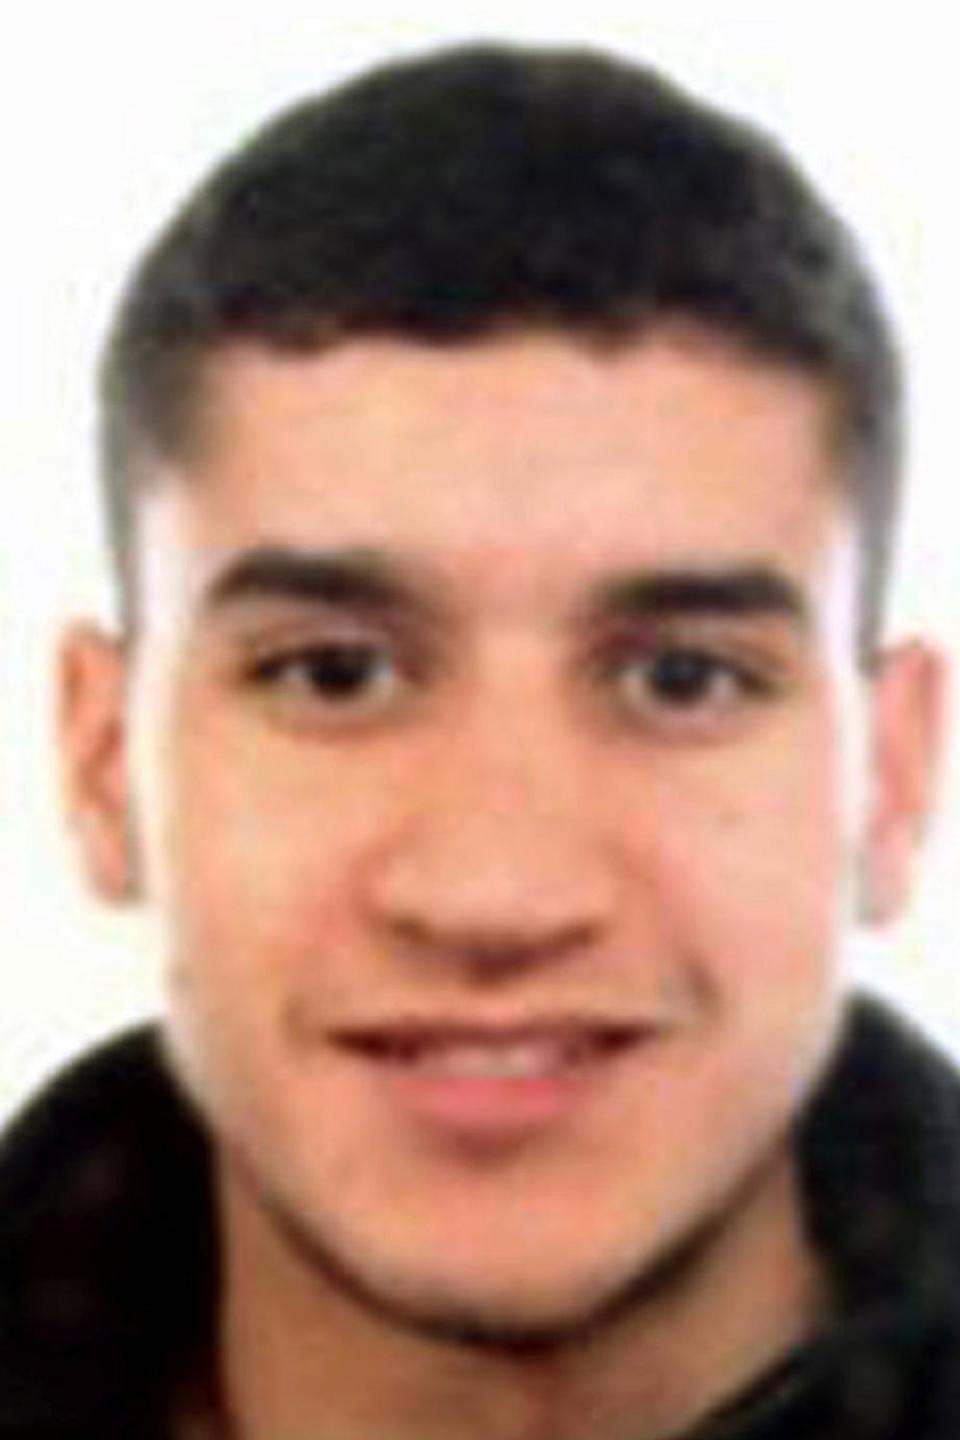 Police are hunting Younes Abouyaaqoub, 22